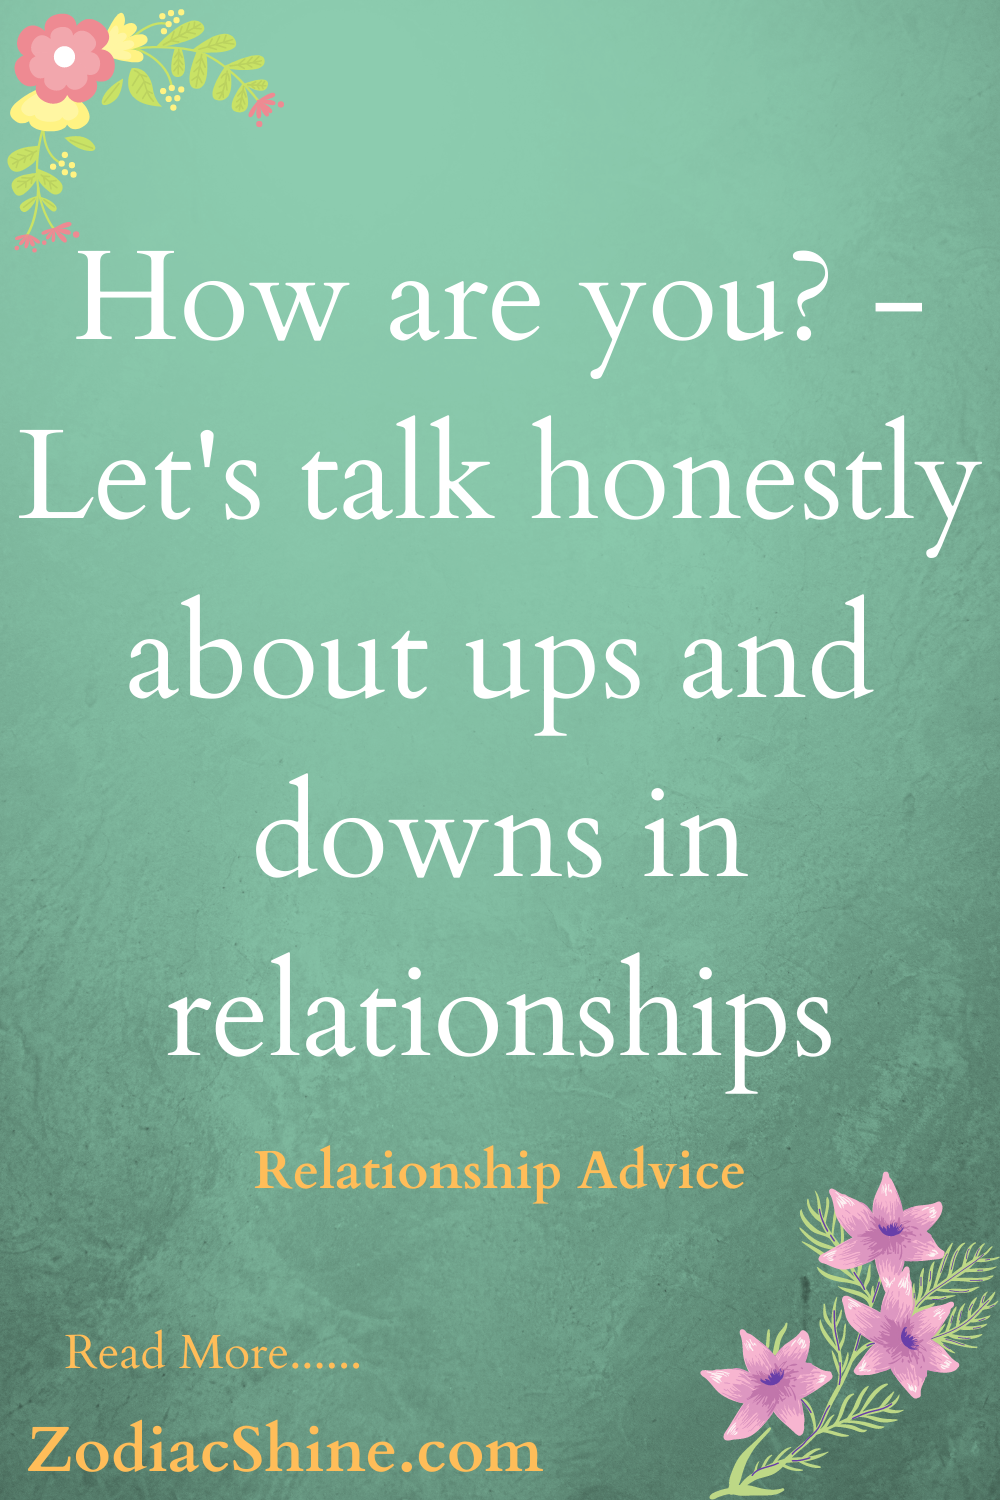 How are you? - Let's talk honestly about ups and downs in relationships